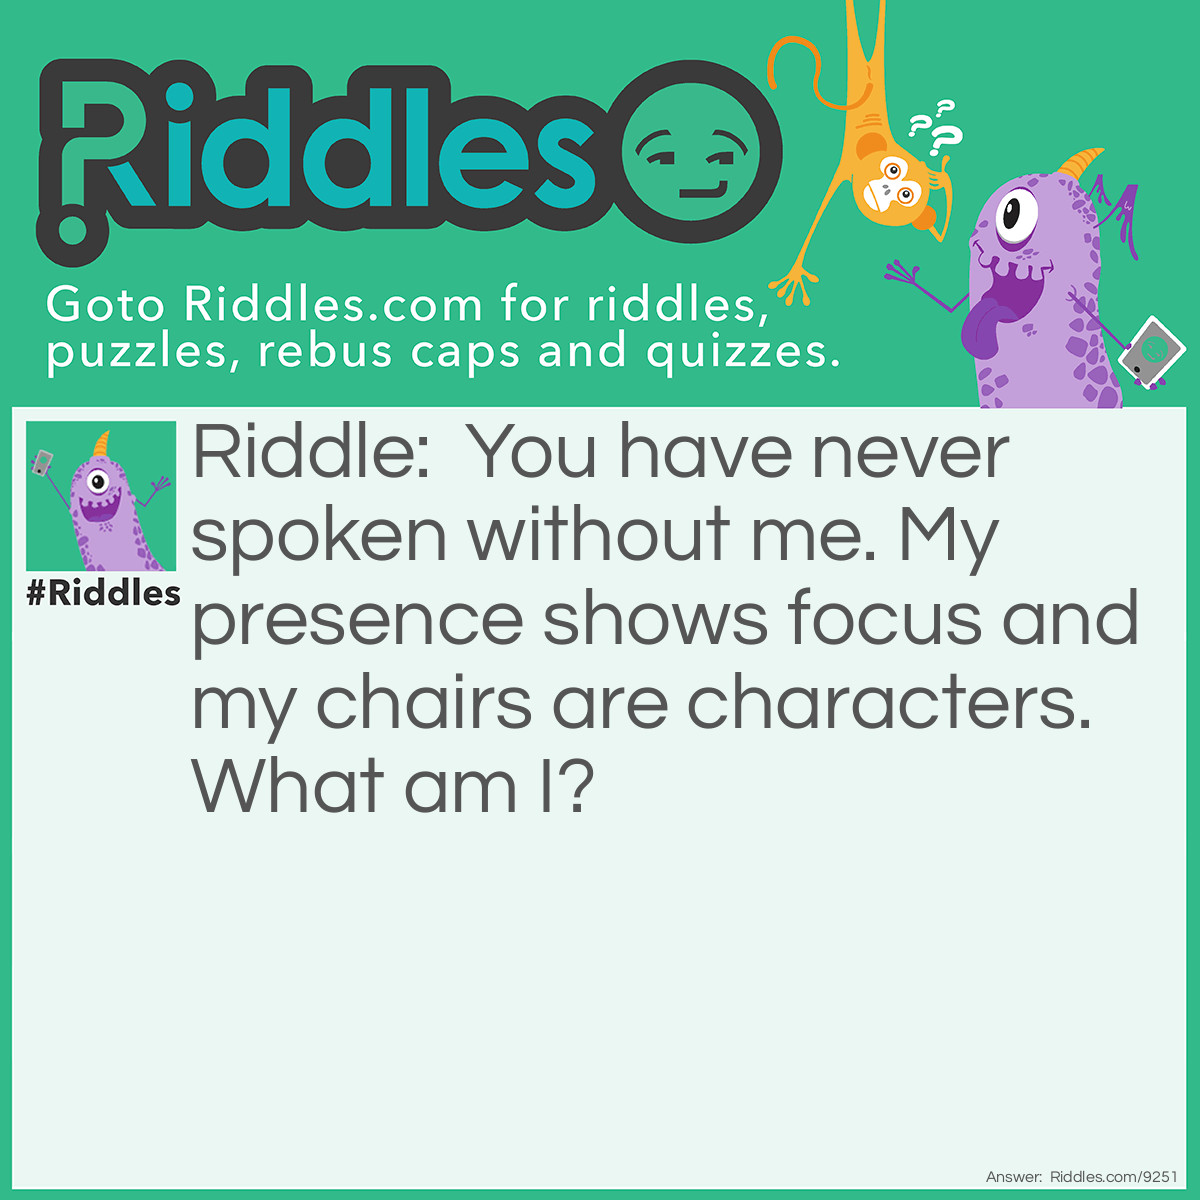 Riddle: You have never spoken without me. My presence shows focus and my chairs are characters. What am I? Answer: Accent. Everyone speaks with an accent. To put an accent on something is to put focus on it. Accents sit on letters (characters).